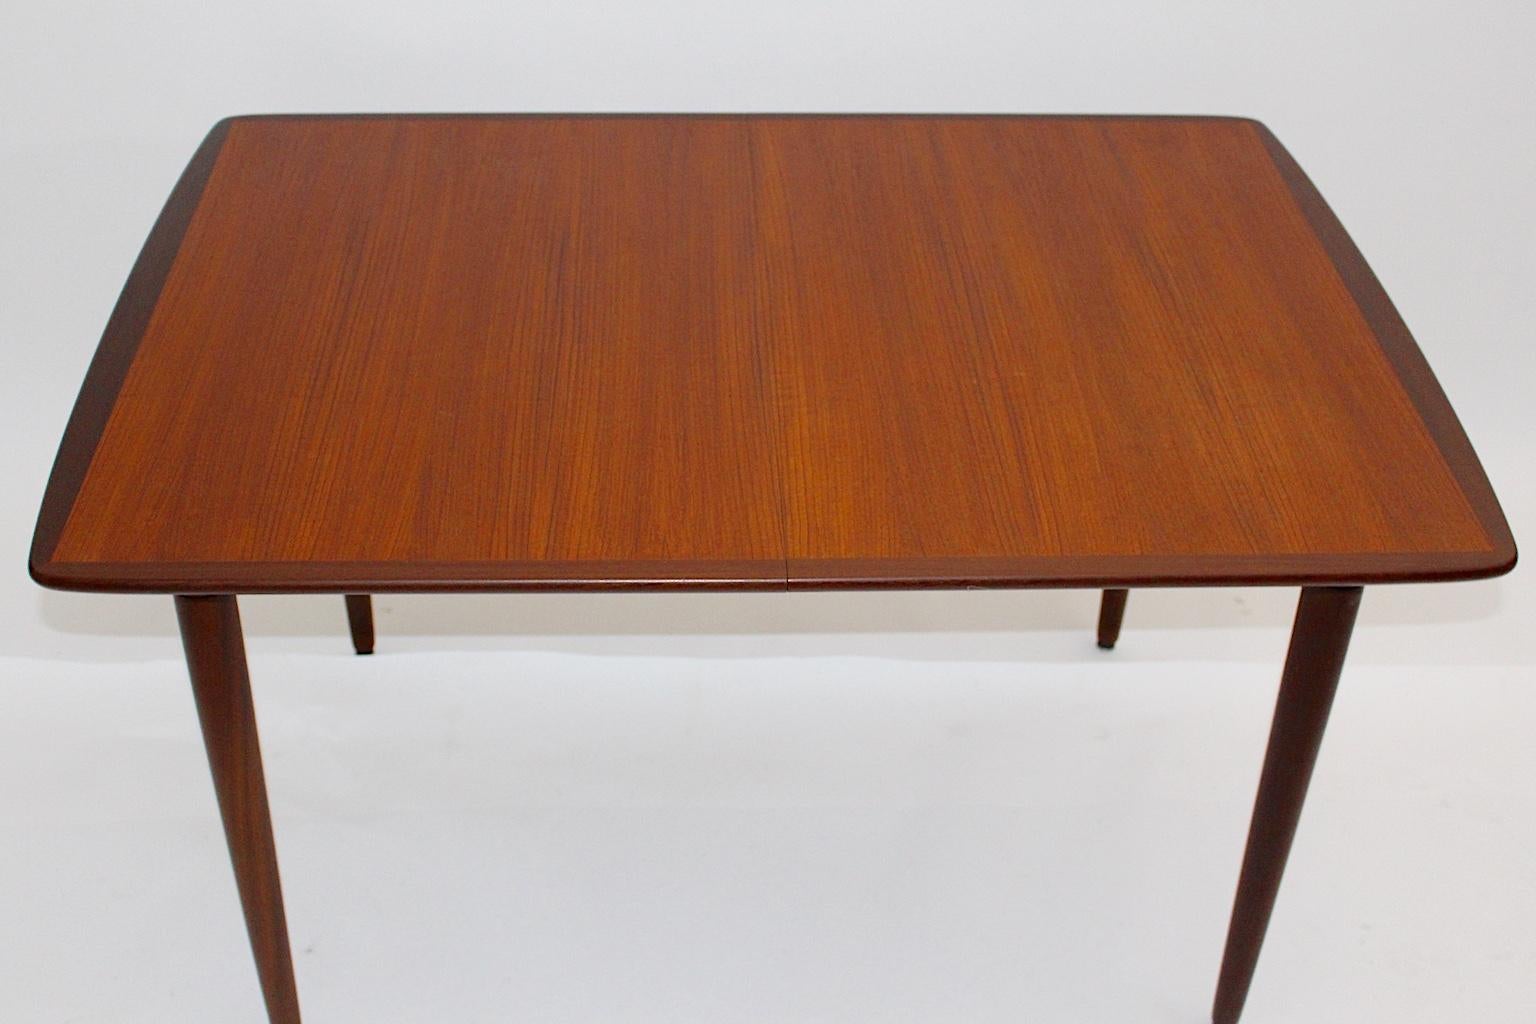 Scandinavian Modern vintage teak extending dining table or table, which shows 3 extending leaves.
Each of the leaves has the dimensions 30 cm x 90 cm.
The table plate contrasts with a dark stained border.
The vintage condition of the vintage teak